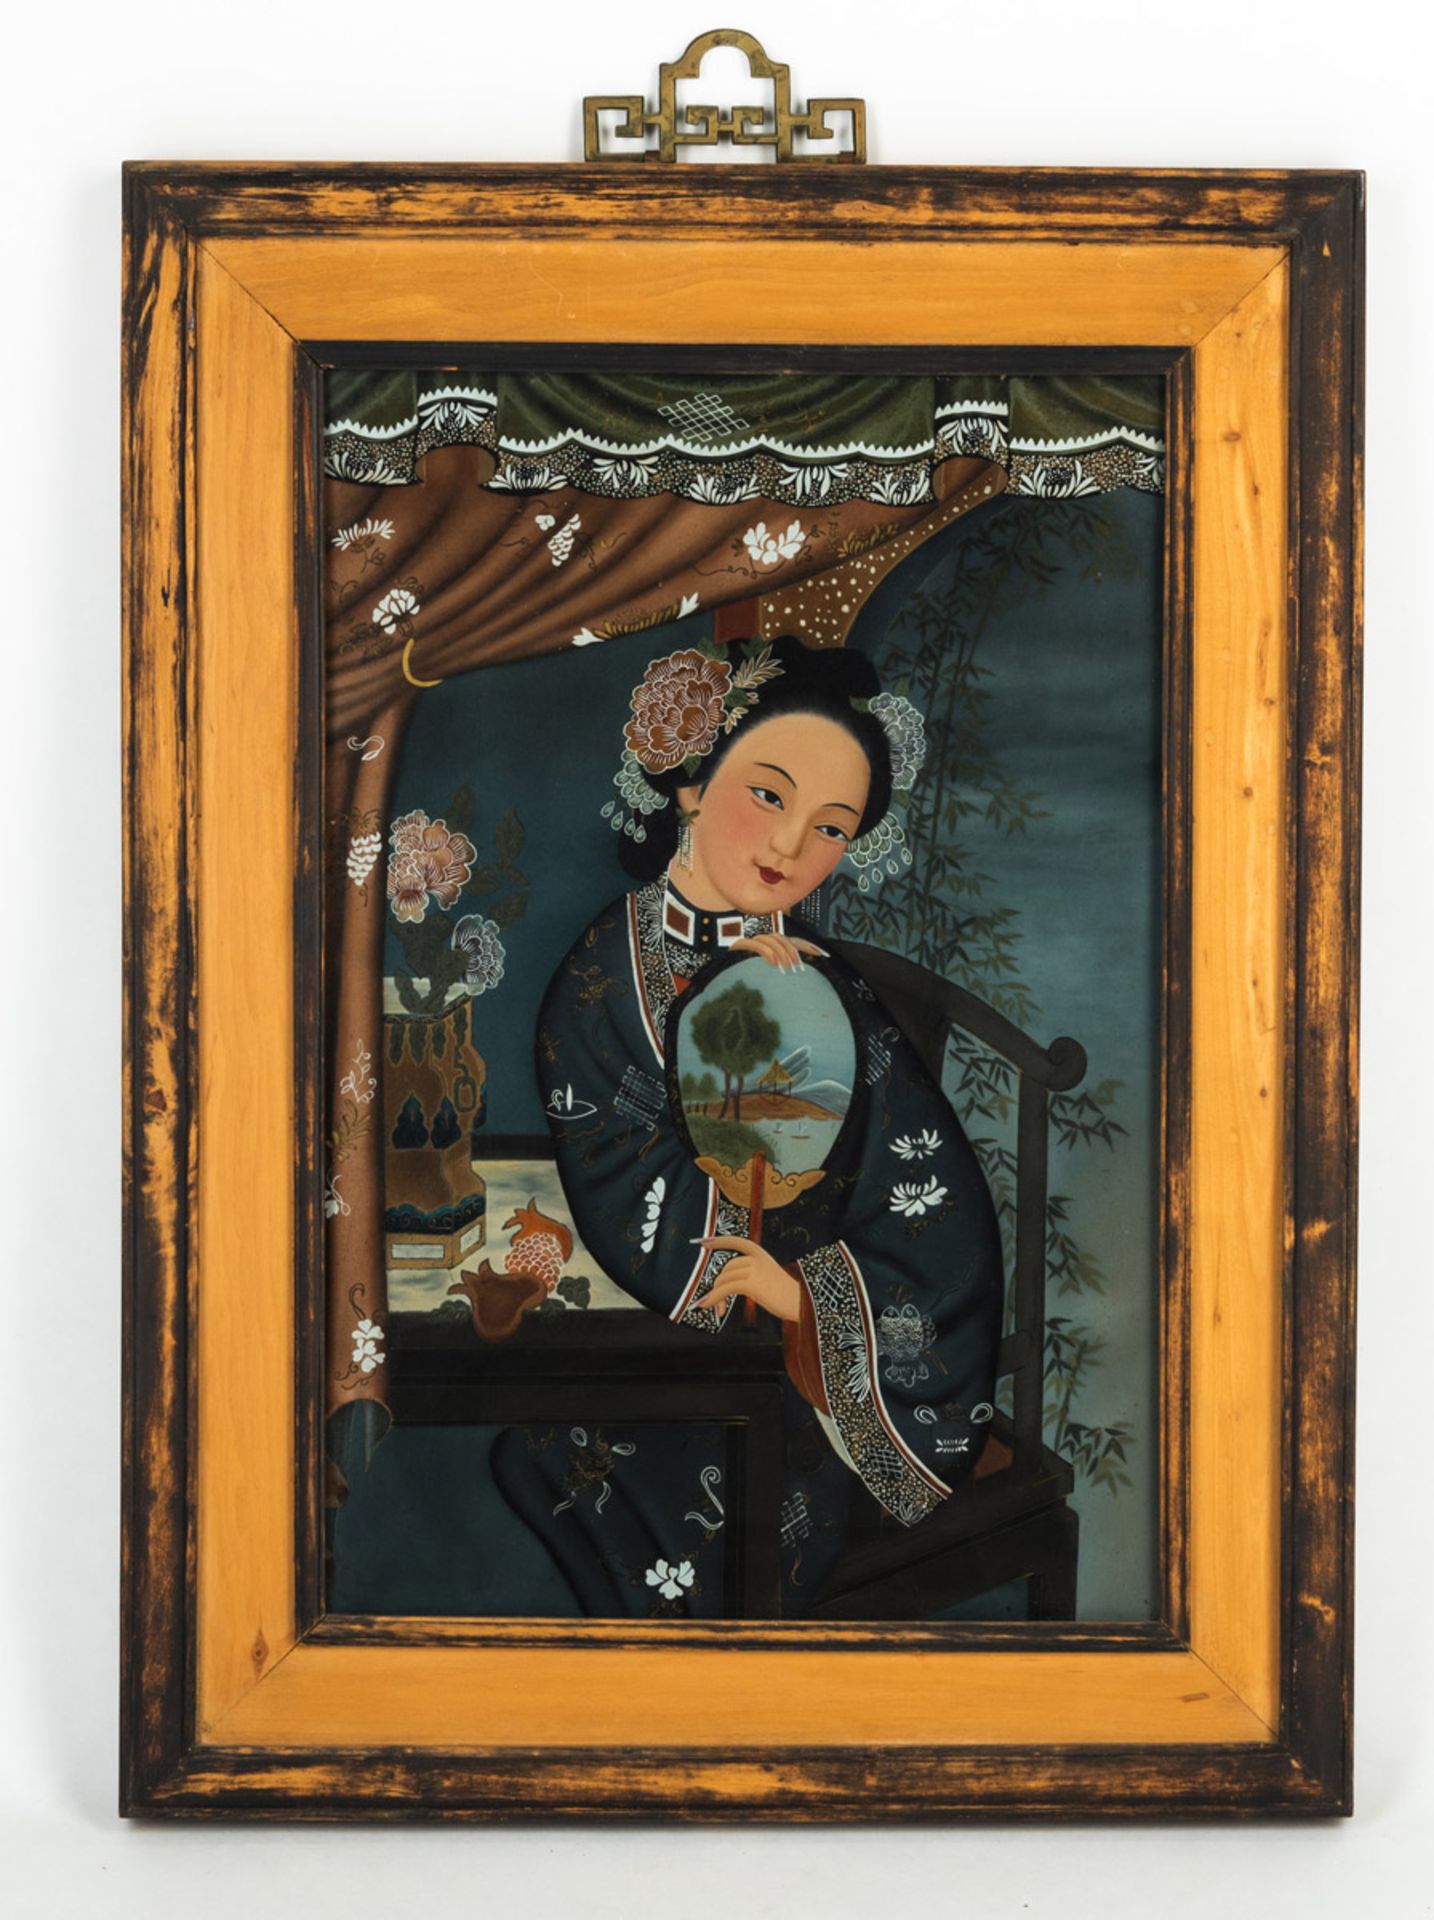 A REVERSE PAINTING ON GLASS OF A LADY HOLDING A FAN - Image 2 of 3